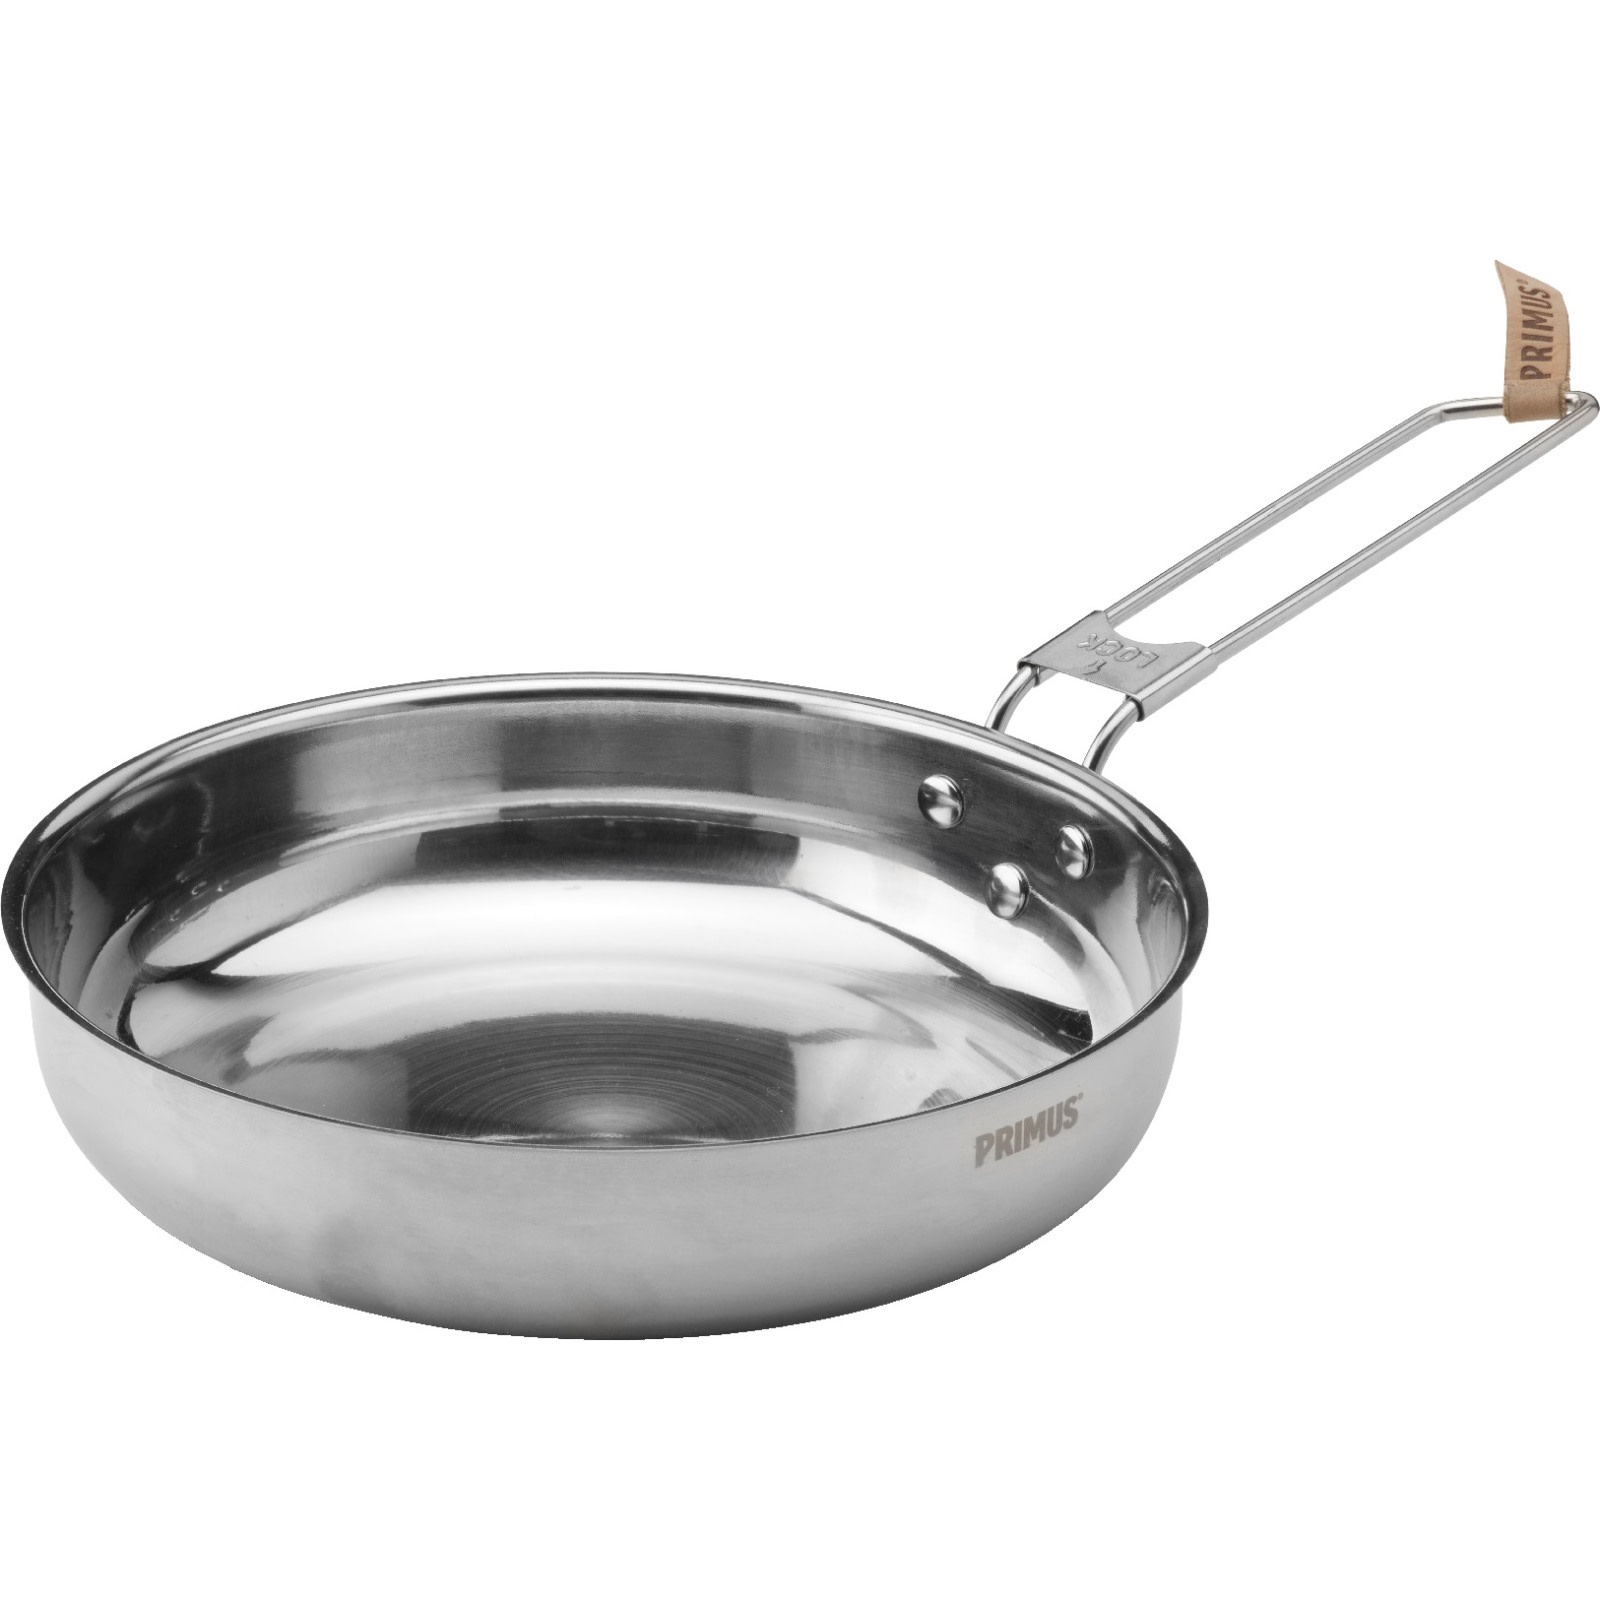 CampFire Frying Pan Stainless Steel 21 cm